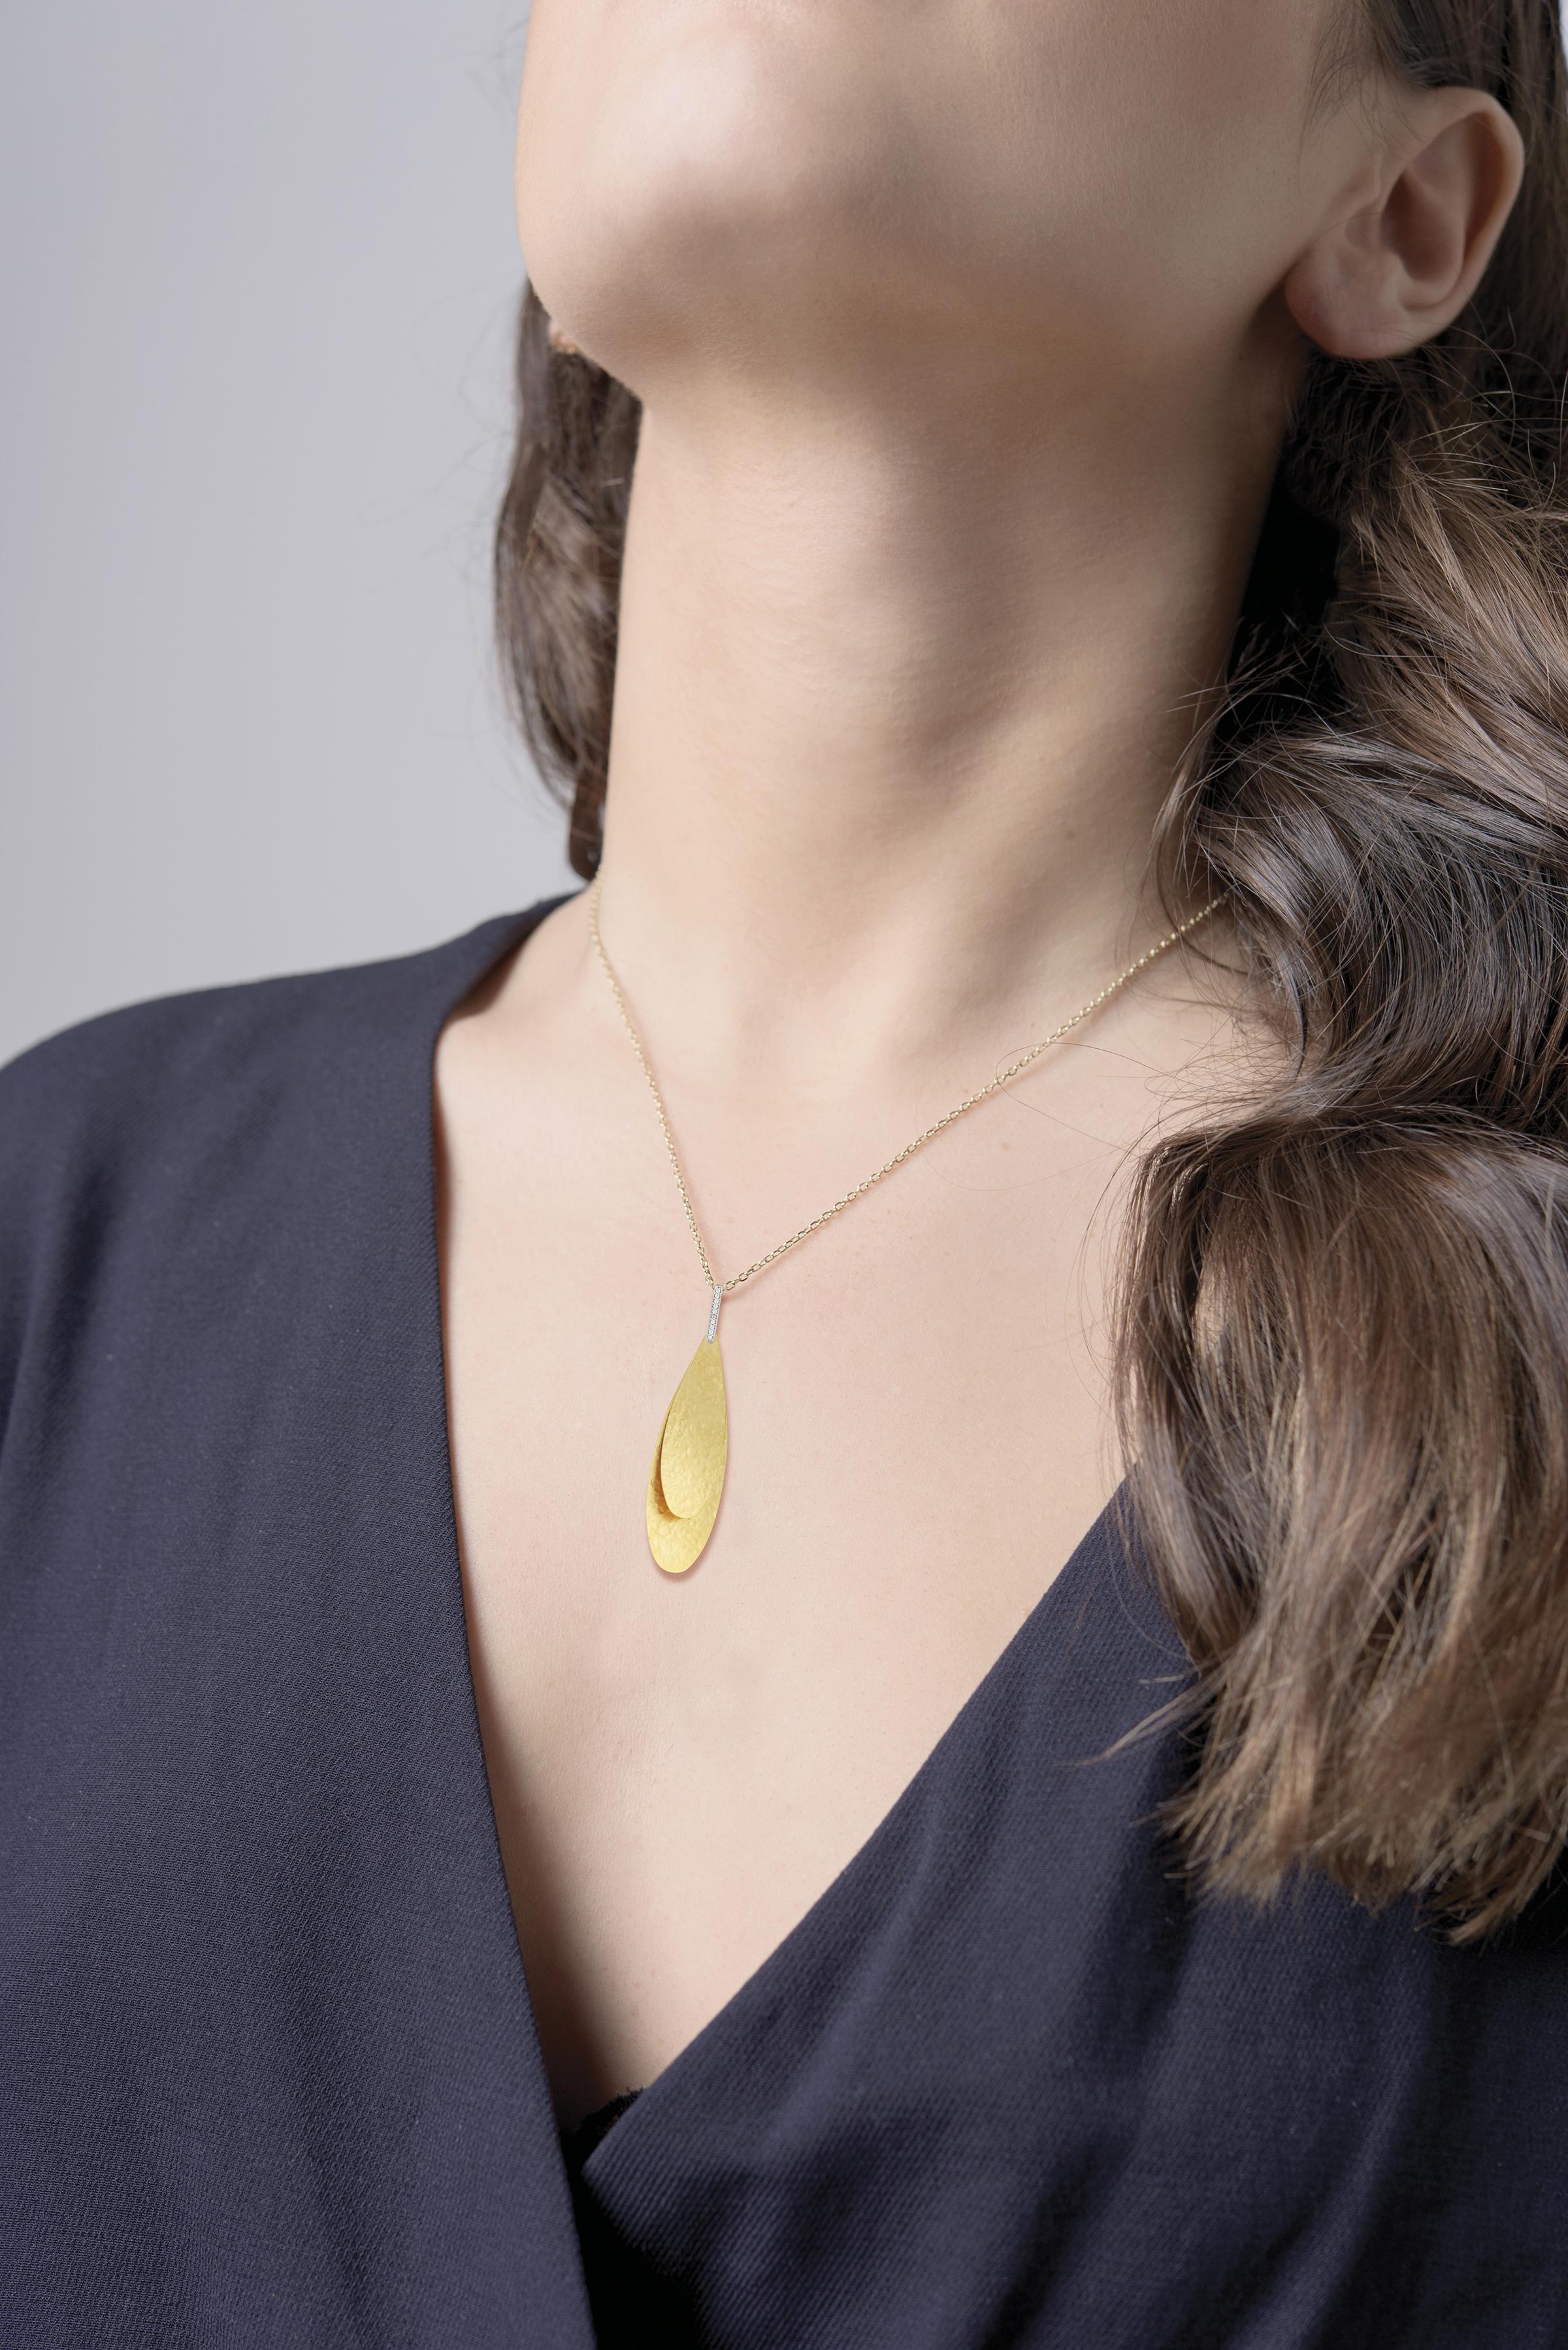 14 Karat Yellow Gold Hand-Crafted Matte and Hammer-Finished Petal Pendant, Sliding on a 16